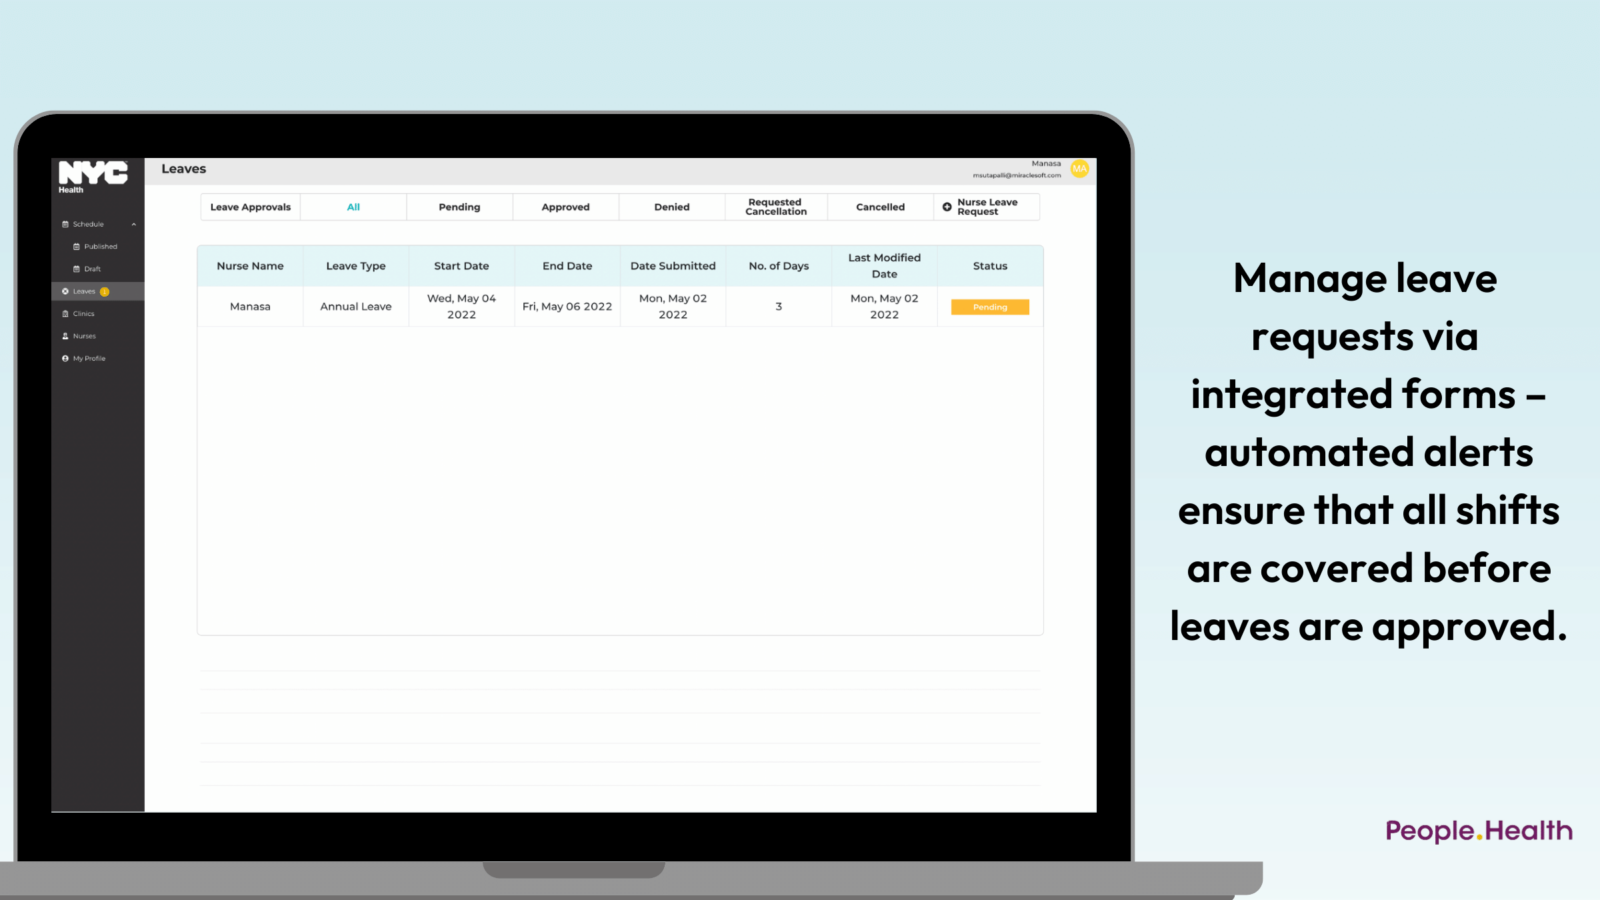 Manage leave requests via integrated forms – automated alerts ensure that all shifts are covered before leaves are approved.